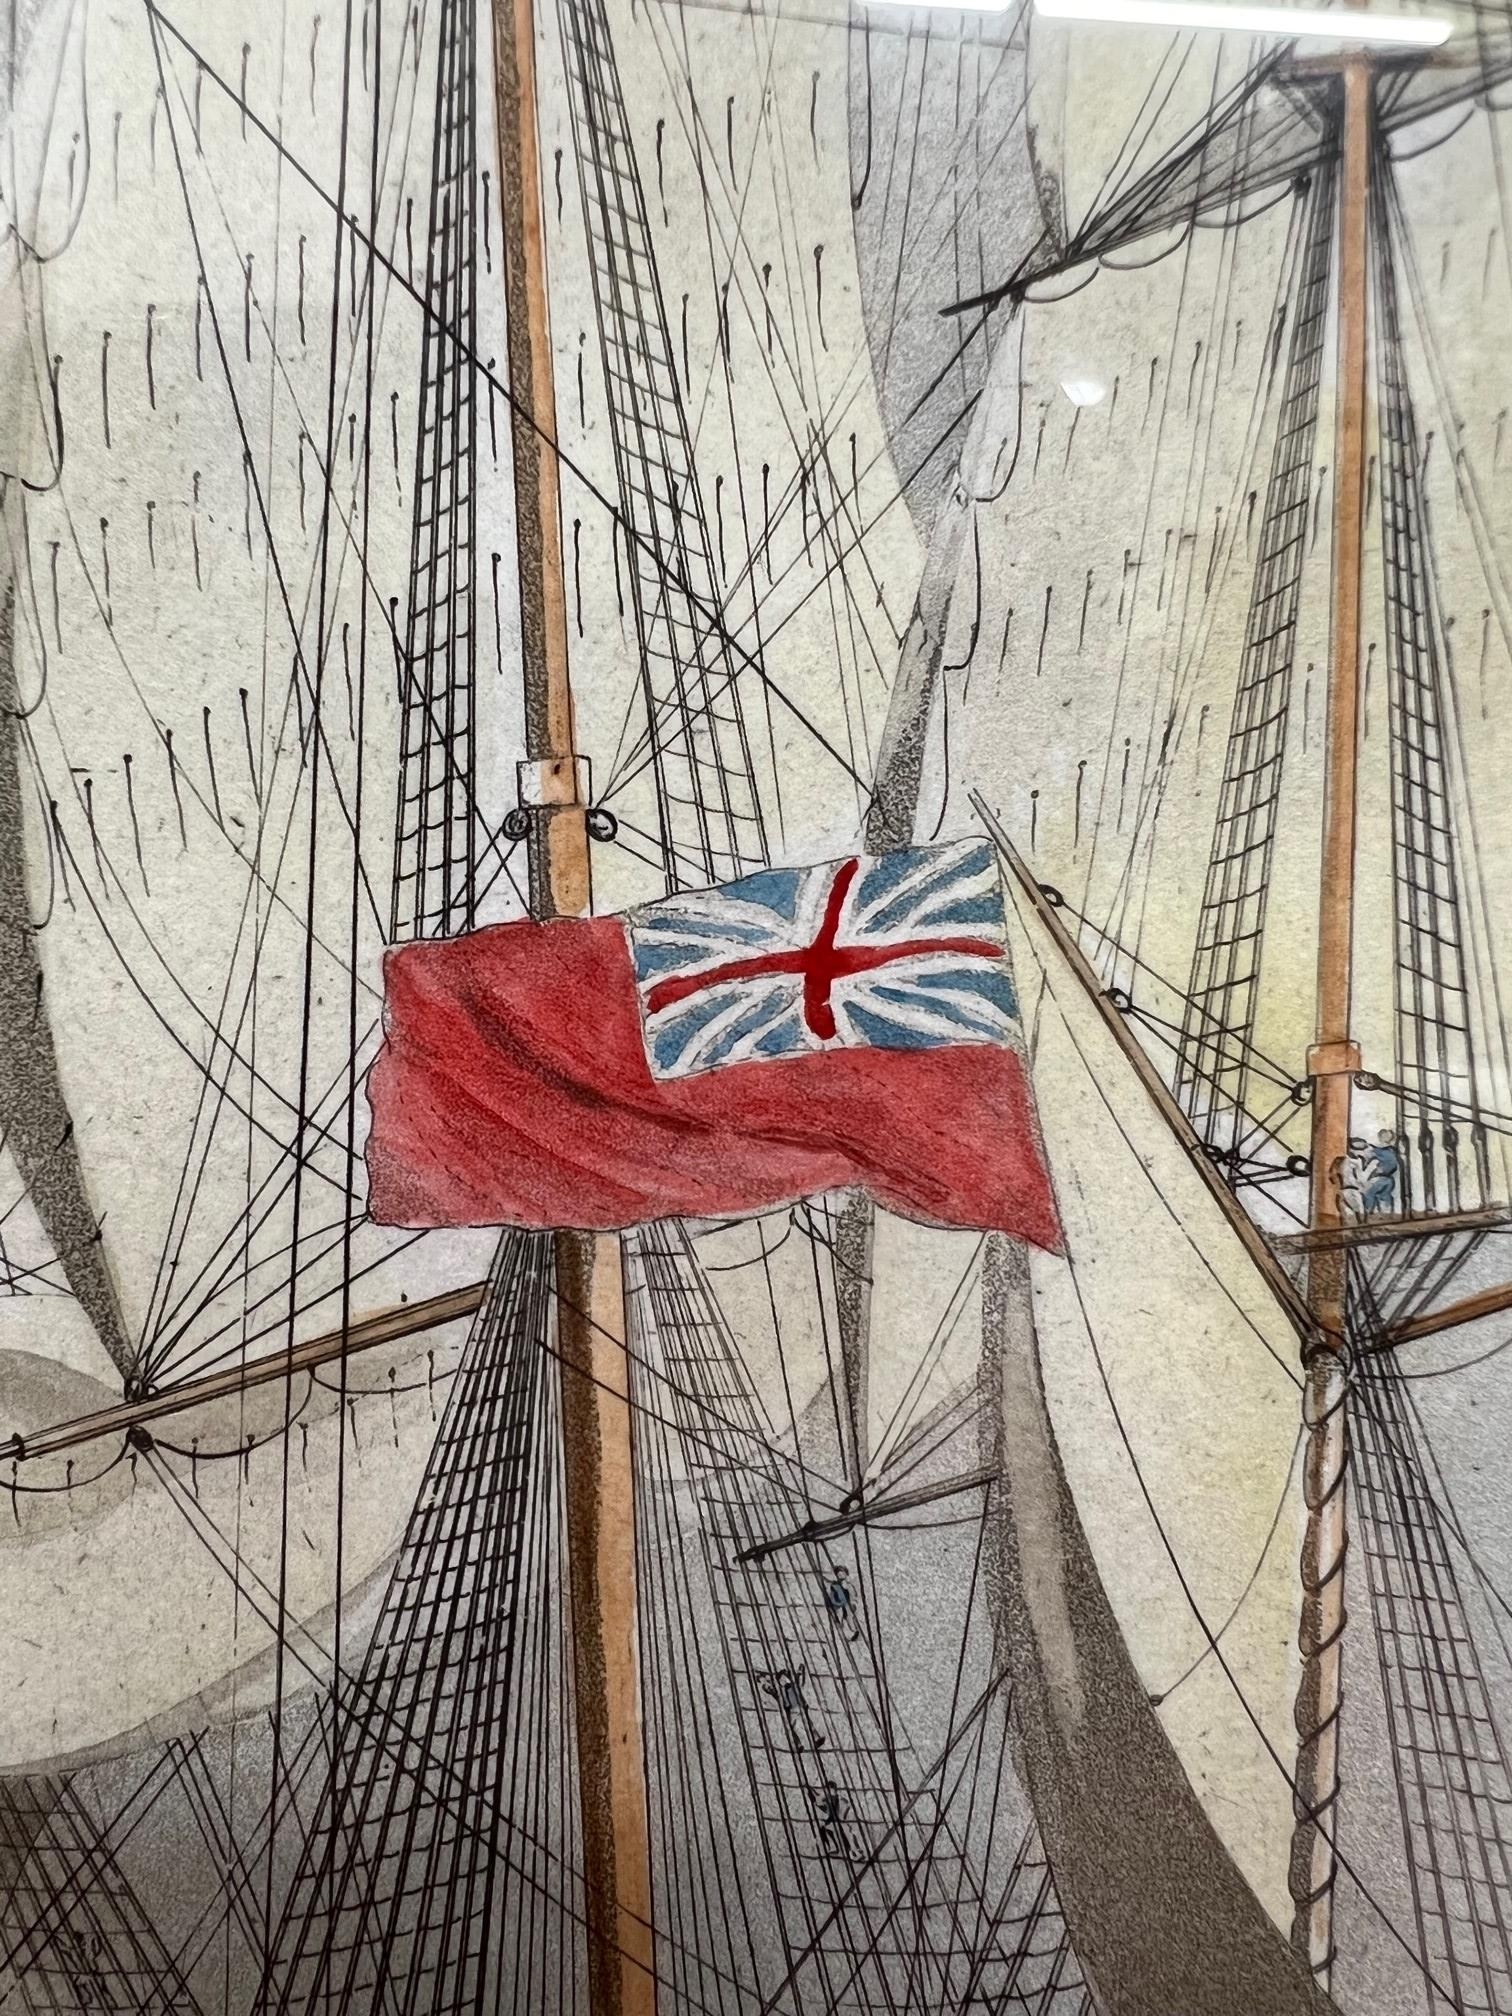 C. ROSENBERG, H.C.S. MACQUEEN OFF THE START 26TH JANUARY 1832, COLOURED ETCHING AND HAND COLOURED - Image 4 of 11